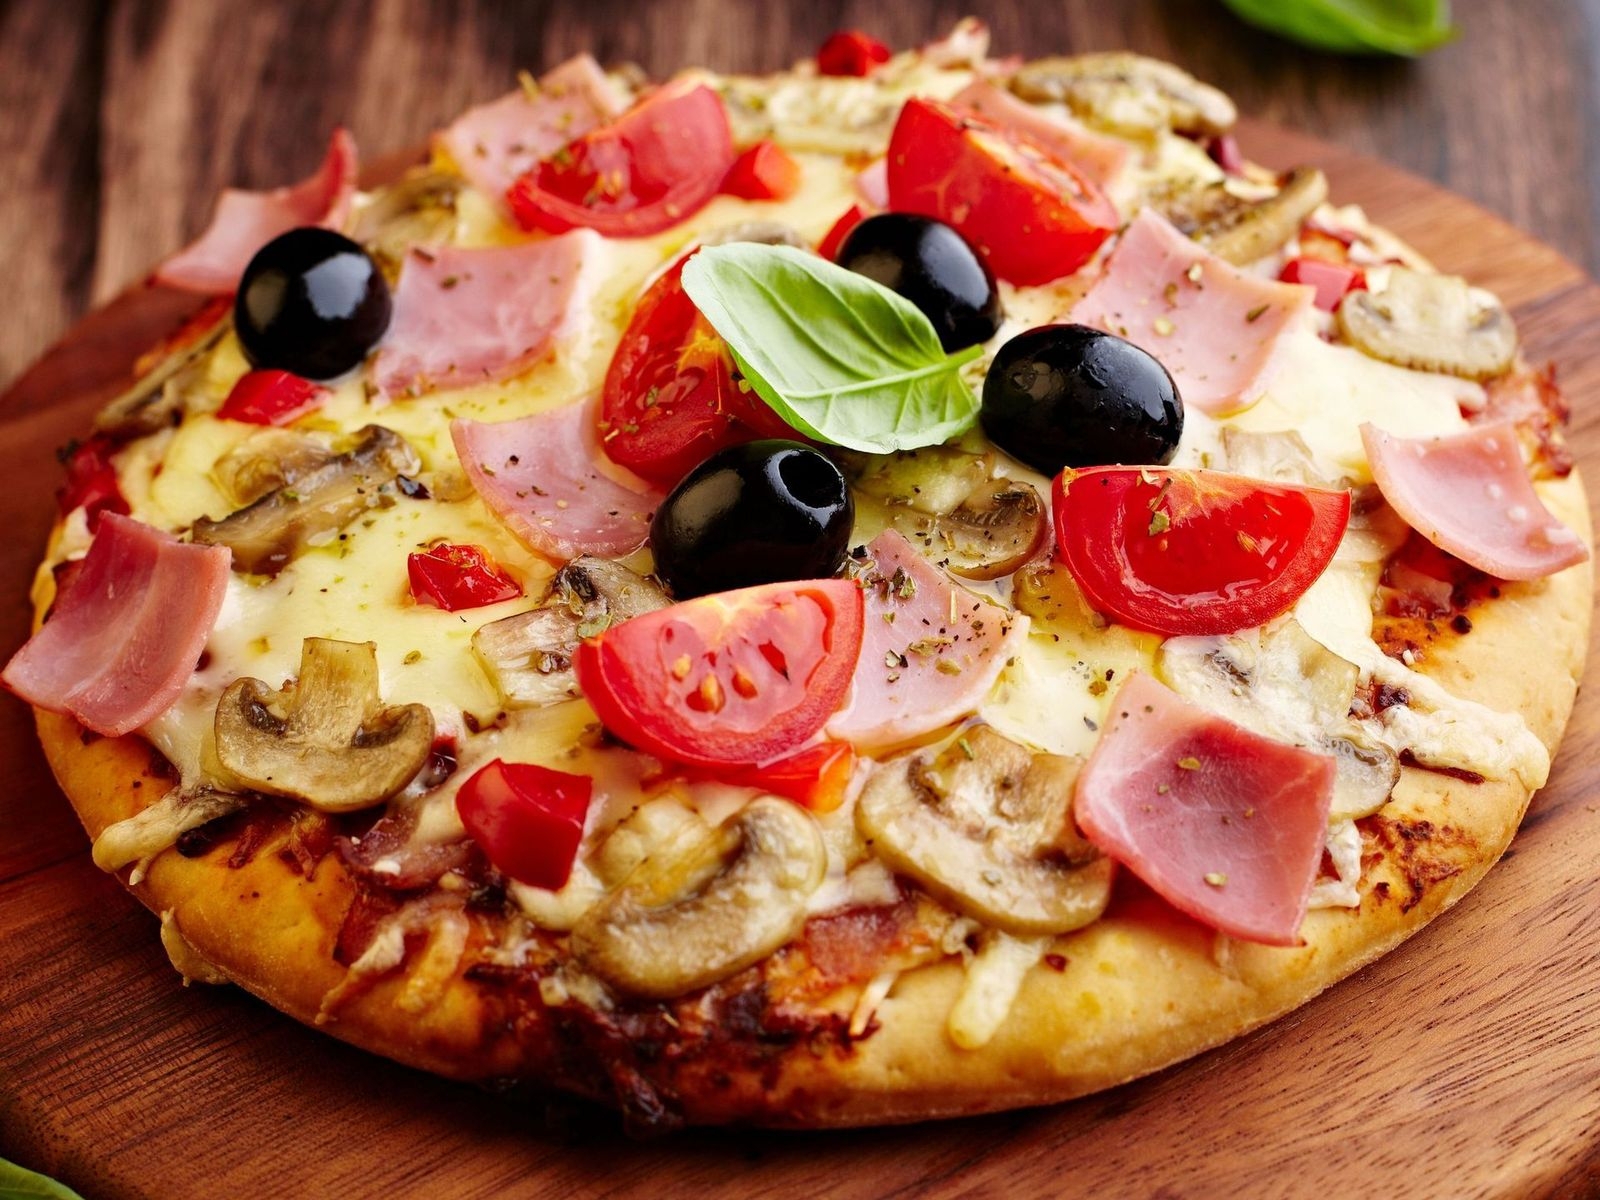 Pizza with tomatoes